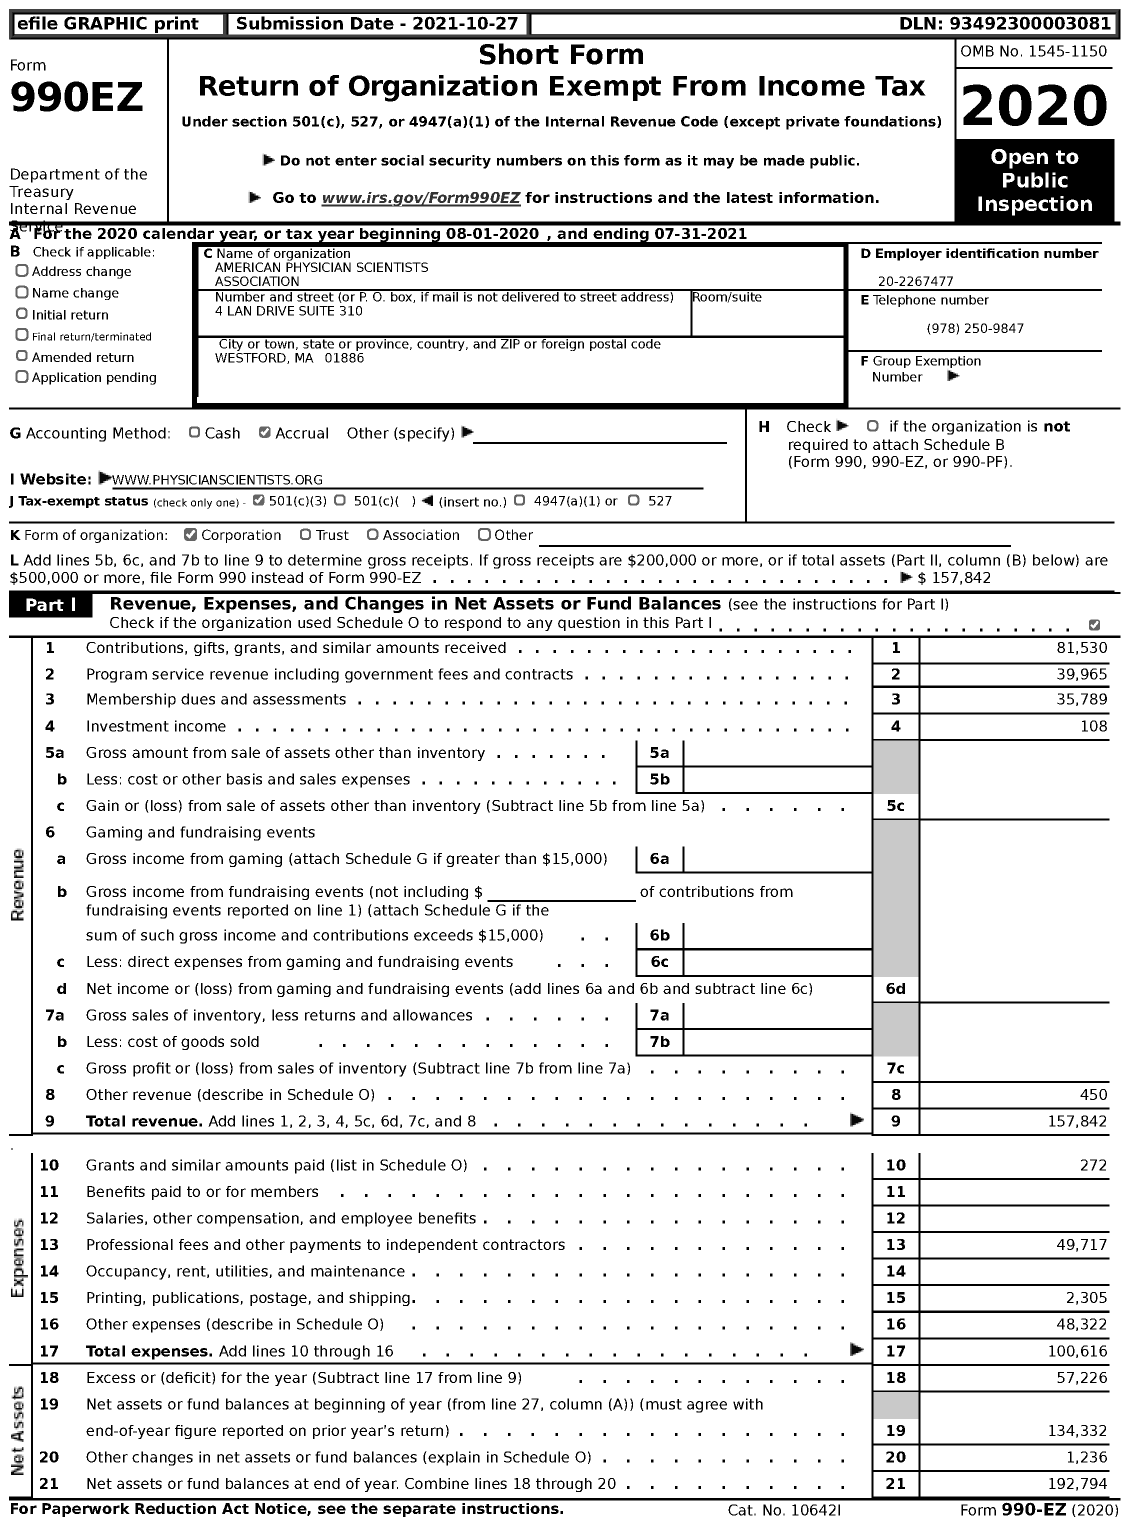 Image of first page of 2020 Form 990EZ for American Physician Scientists Association